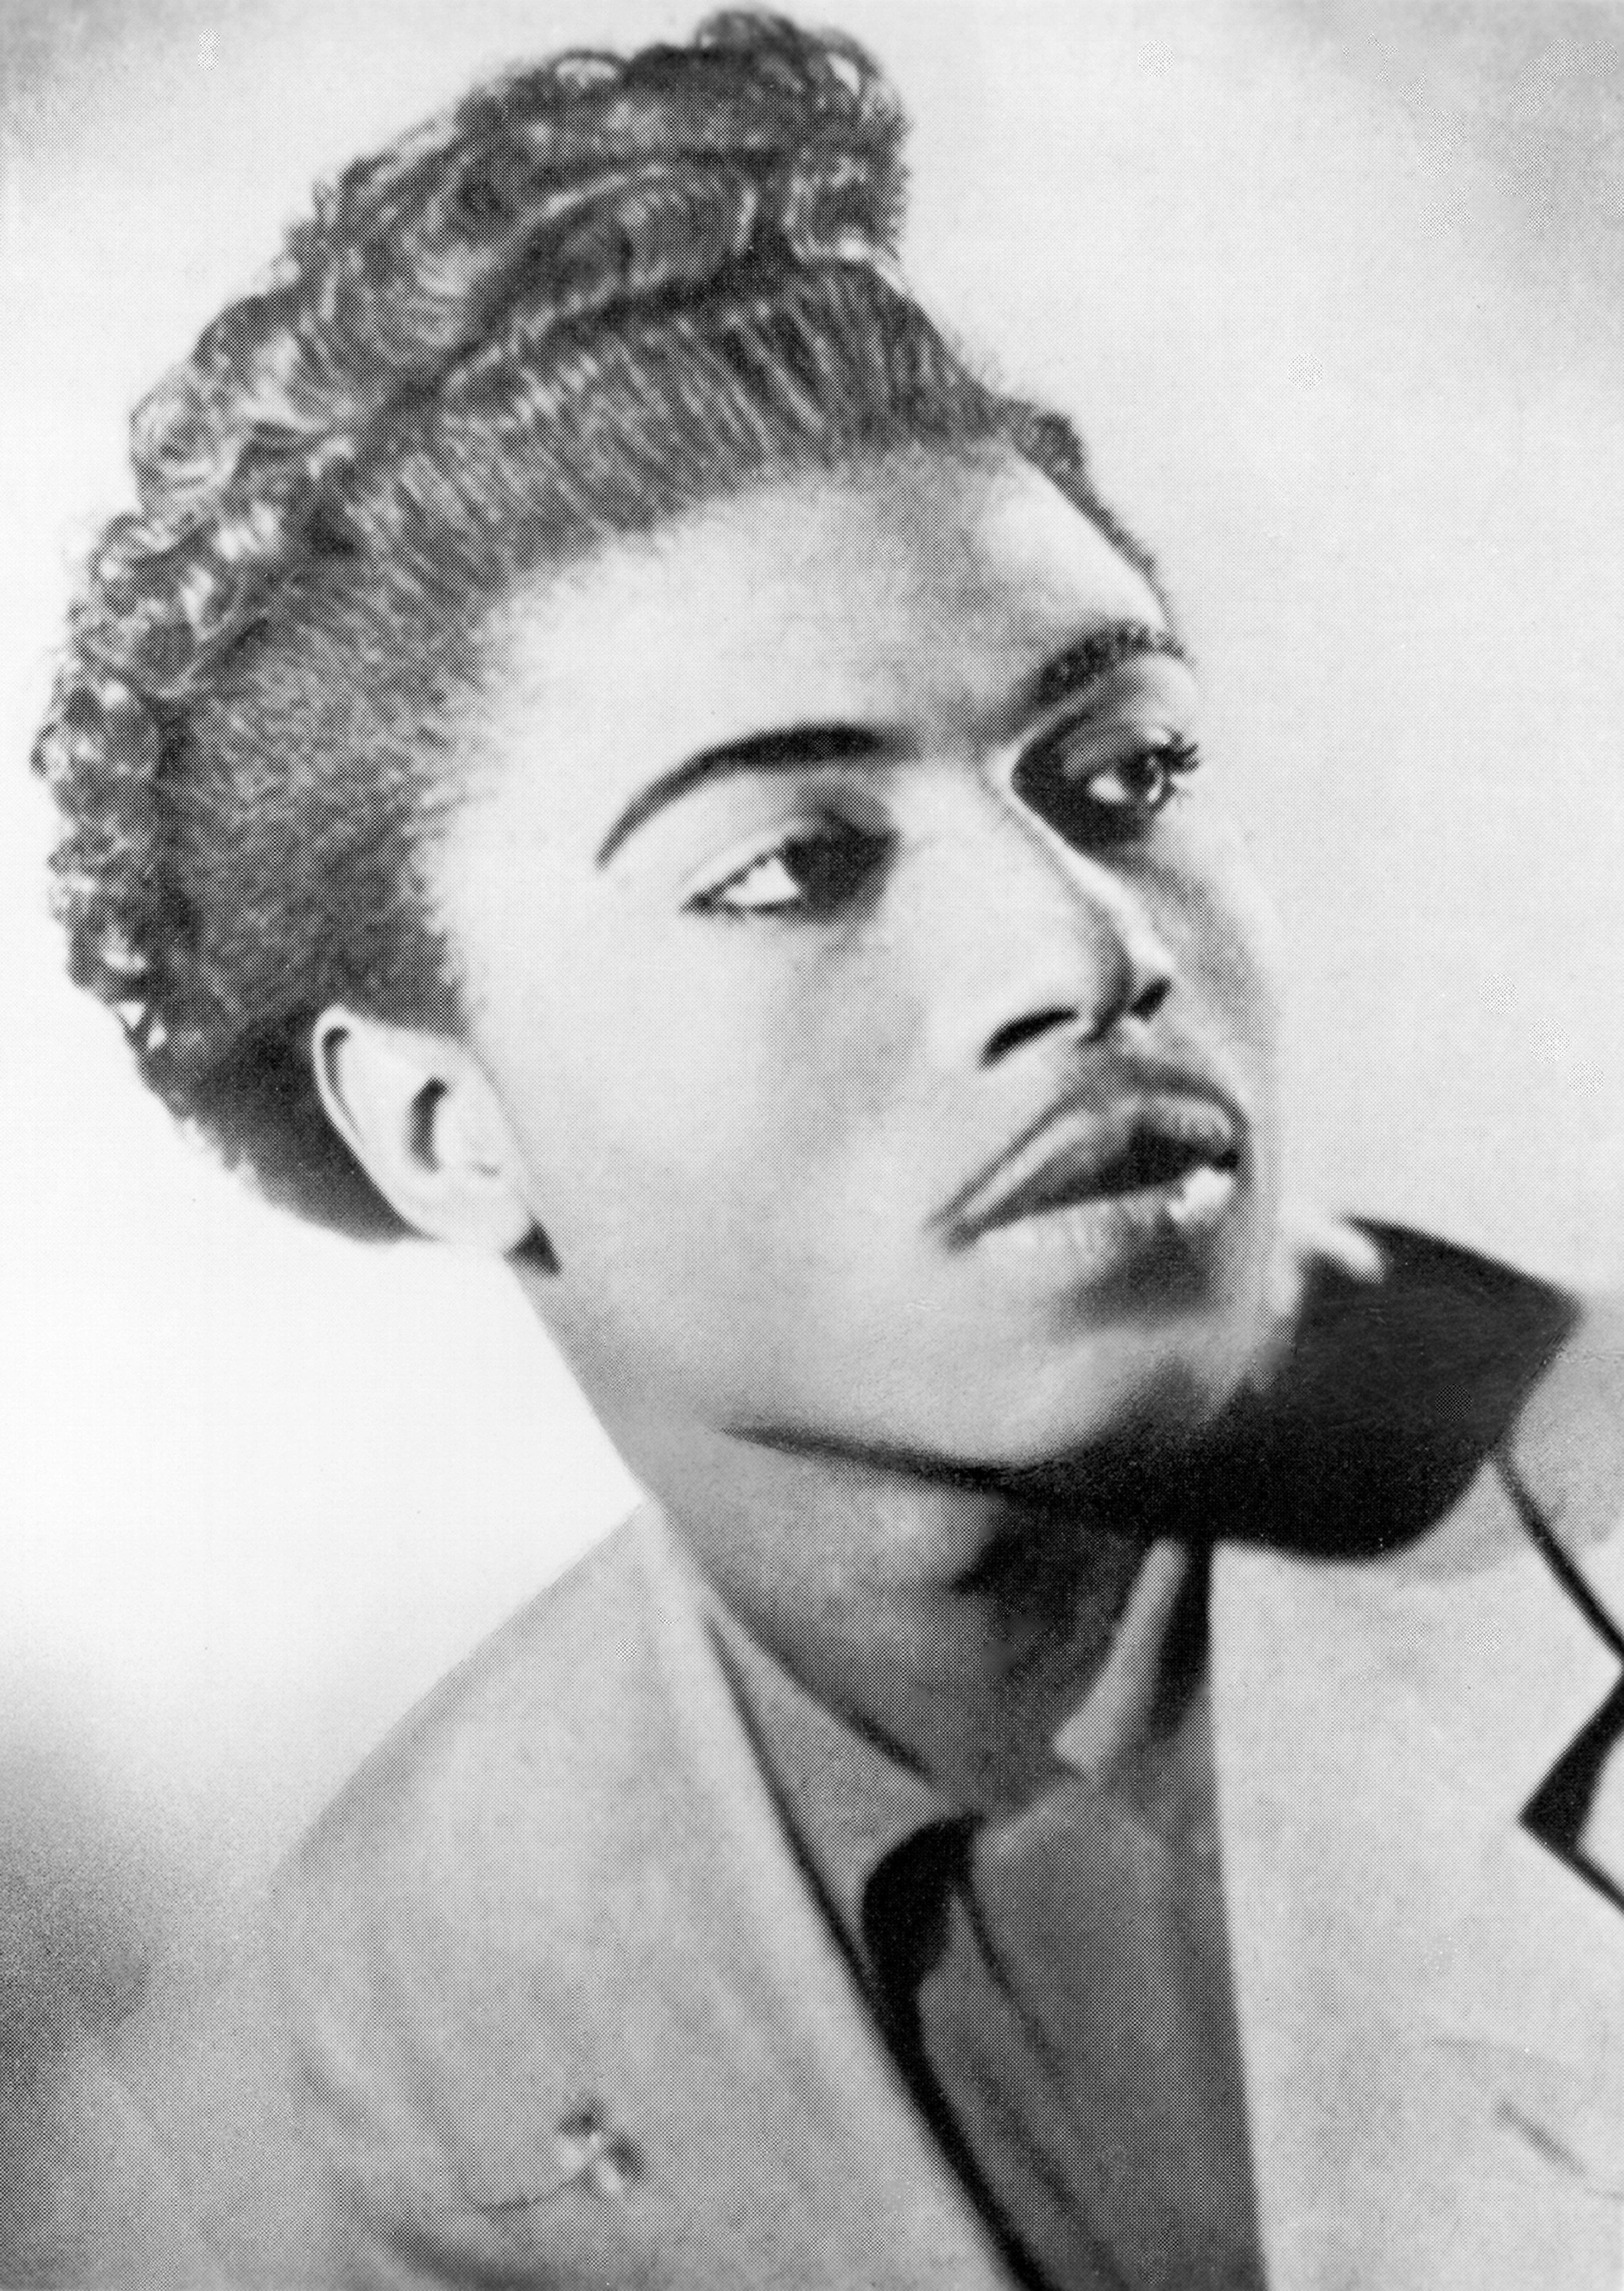 Little Richard: I Am Everything' Review: Rock Royalty is Crowned